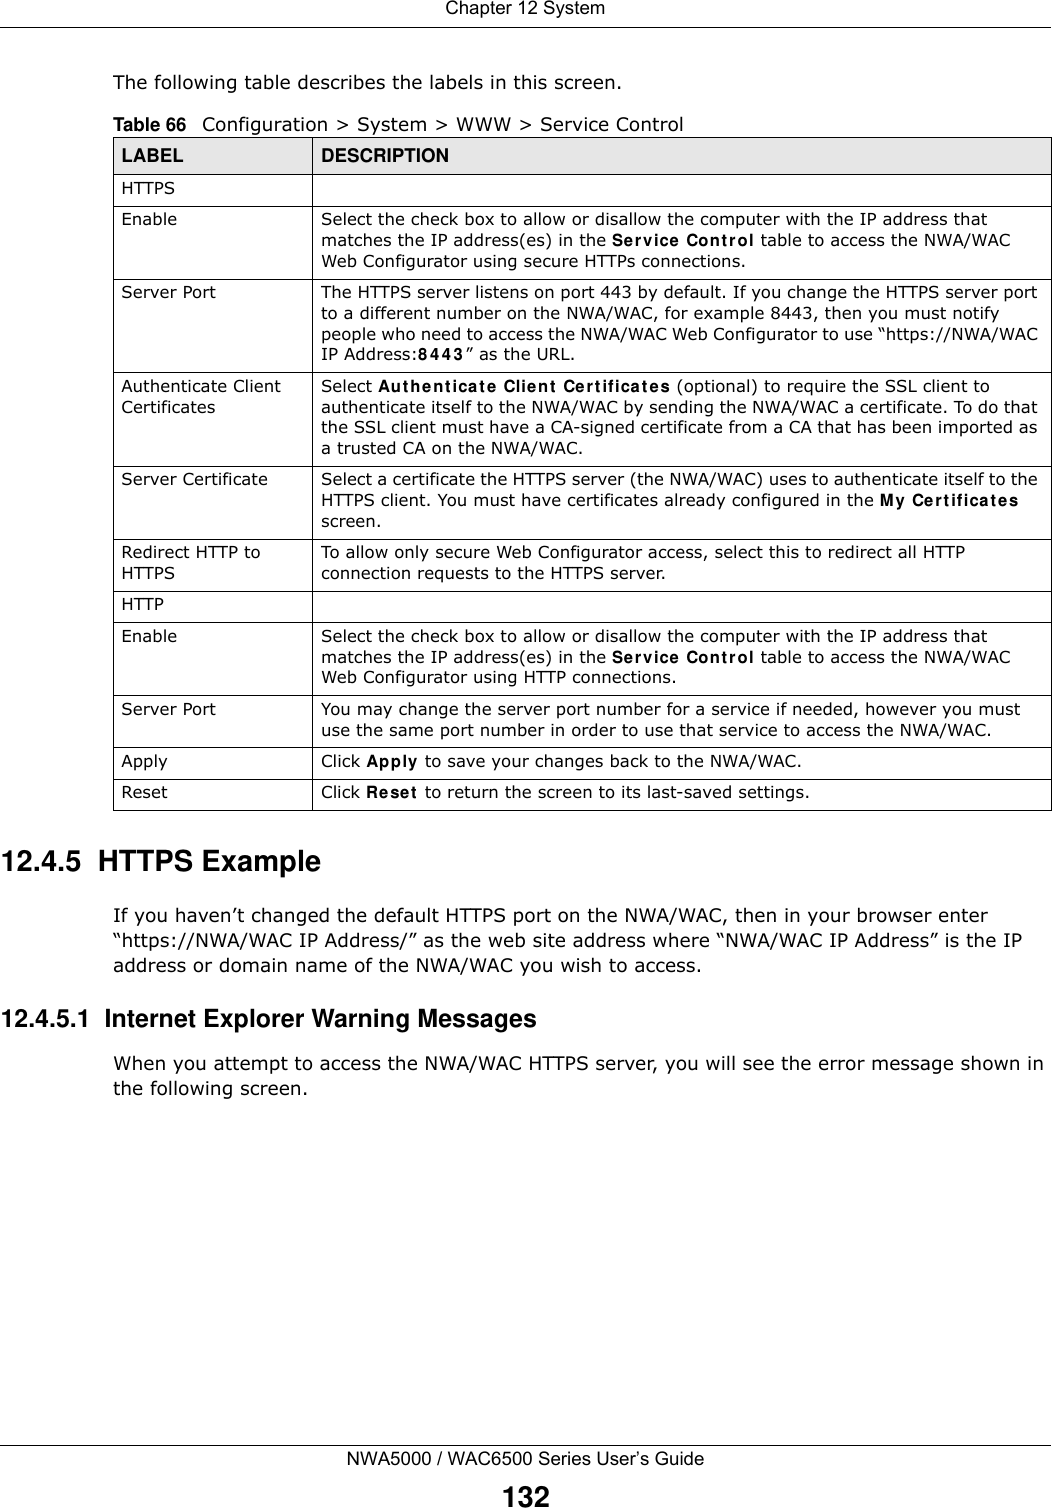 Chapter 12 SystemNWA5000 / WAC6500 Series User’s Guide132The following table describes the labels in this screen.  12.4.5  HTTPS ExampleIf you haven’t changed the default HTTPS port on the NWA/WAC, then in your browser enter “https://NWA/WAC IP Address/” as the web site address where “NWA/WAC IP Address” is the IP address or domain name of the NWA/WAC you wish to access.12.4.5.1  Internet Explorer Warning MessagesWhen you attempt to access the NWA/WAC HTTPS server, you will see the error message shown in the following screen.Table 66   Configuration &gt; System &gt; WWW &gt; Service ControlLABEL DESCRIPTIONHTTPSEnable Select the check box to allow or disallow the computer with the IP address that matches the IP address(es) in the Service Cont rol table to access the NWA/WAC Web Configurator using secure HTTPs connections.Server Port The HTTPS server listens on port 443 by default. If you change the HTTPS server port to a different number on the NWA/WAC, for example 8443, then you must notify people who need to access the NWA/WAC Web Configurator to use “https://NWA/WAC IP Address:8 4 4 3 ” as the URL.Authenticate Client CertificatesSelect Aut h e n t ica t e Client Ce r t ificat e s (optional) to require the SSL client to authenticate itself to the NWA/WAC by sending the NWA/WAC a certificate. To do that the SSL client must have a CA-signed certificate from a CA that has been imported as a trusted CA on the NWA/WAC.Server Certificate Select a certificate the HTTPS server (the NWA/WAC) uses to authenticate itself to the HTTPS client. You must have certificates already configured in the My Cert ificat e s screen.Redirect HTTP to HTTPS To allow only secure Web Configurator access, select this to redirect all HTTP connection requests to the HTTPS server.HTTPEnable Select the check box to allow or disallow the computer with the IP address that matches the IP address(es) in the Service Cont rol table to access the NWA/WAC Web Configurator using HTTP connections.Server Port You may change the server port number for a service if needed, however you must use the same port number in order to use that service to access the NWA/WAC.Apply Click Apply to save your changes back to the NWA/WAC. Reset Click Re se t  to return the screen to its last-saved settings. 